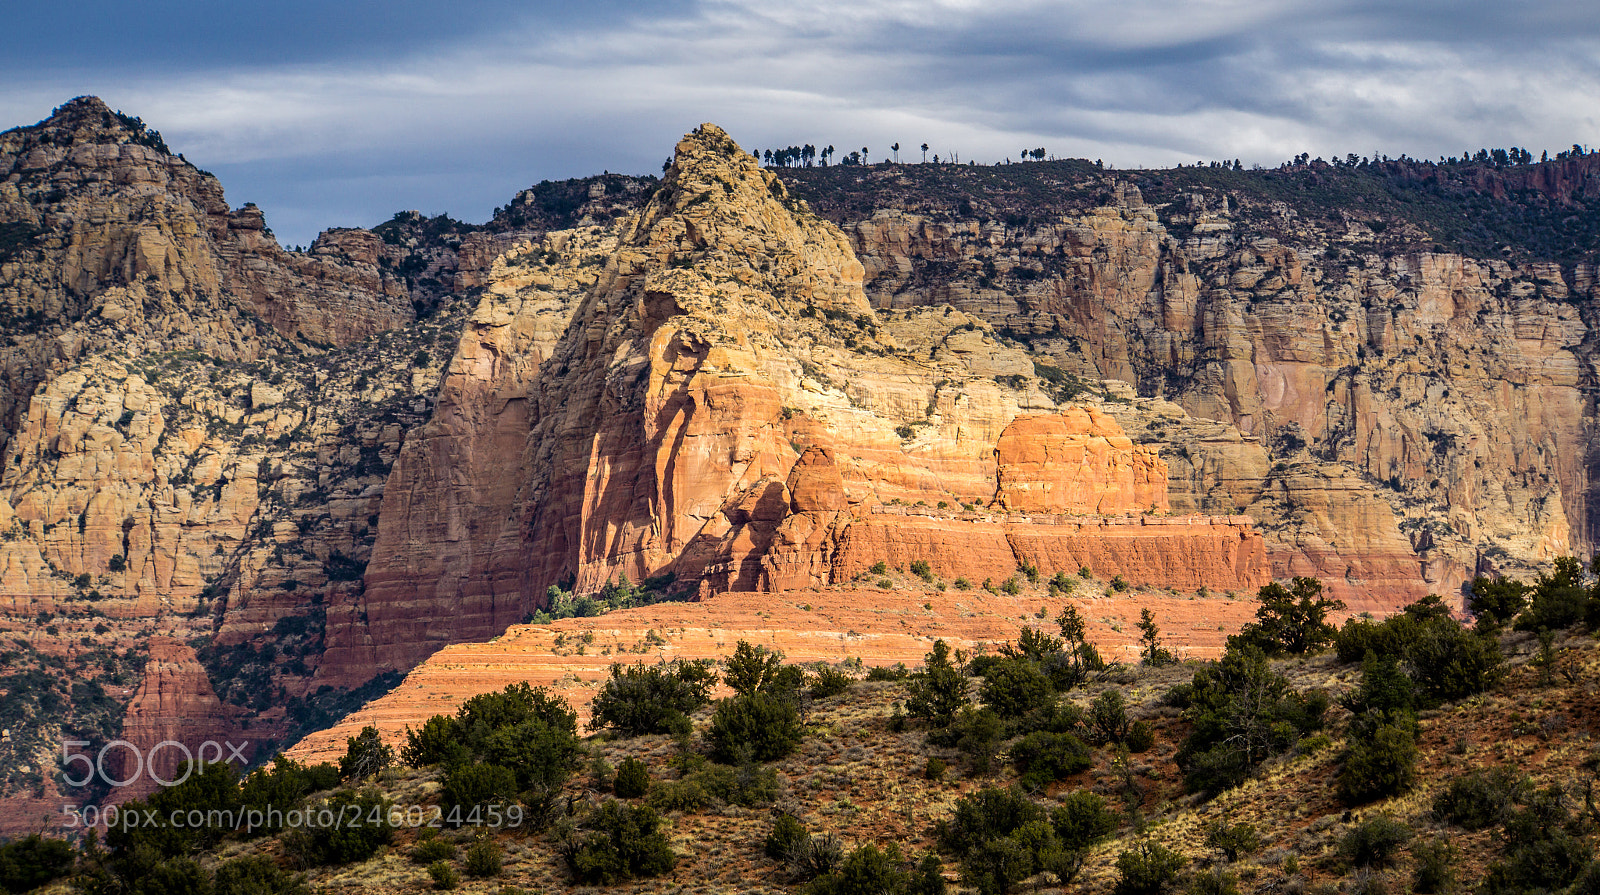 Sony a6000 sample photo. Scenic cathedral rock formation photography